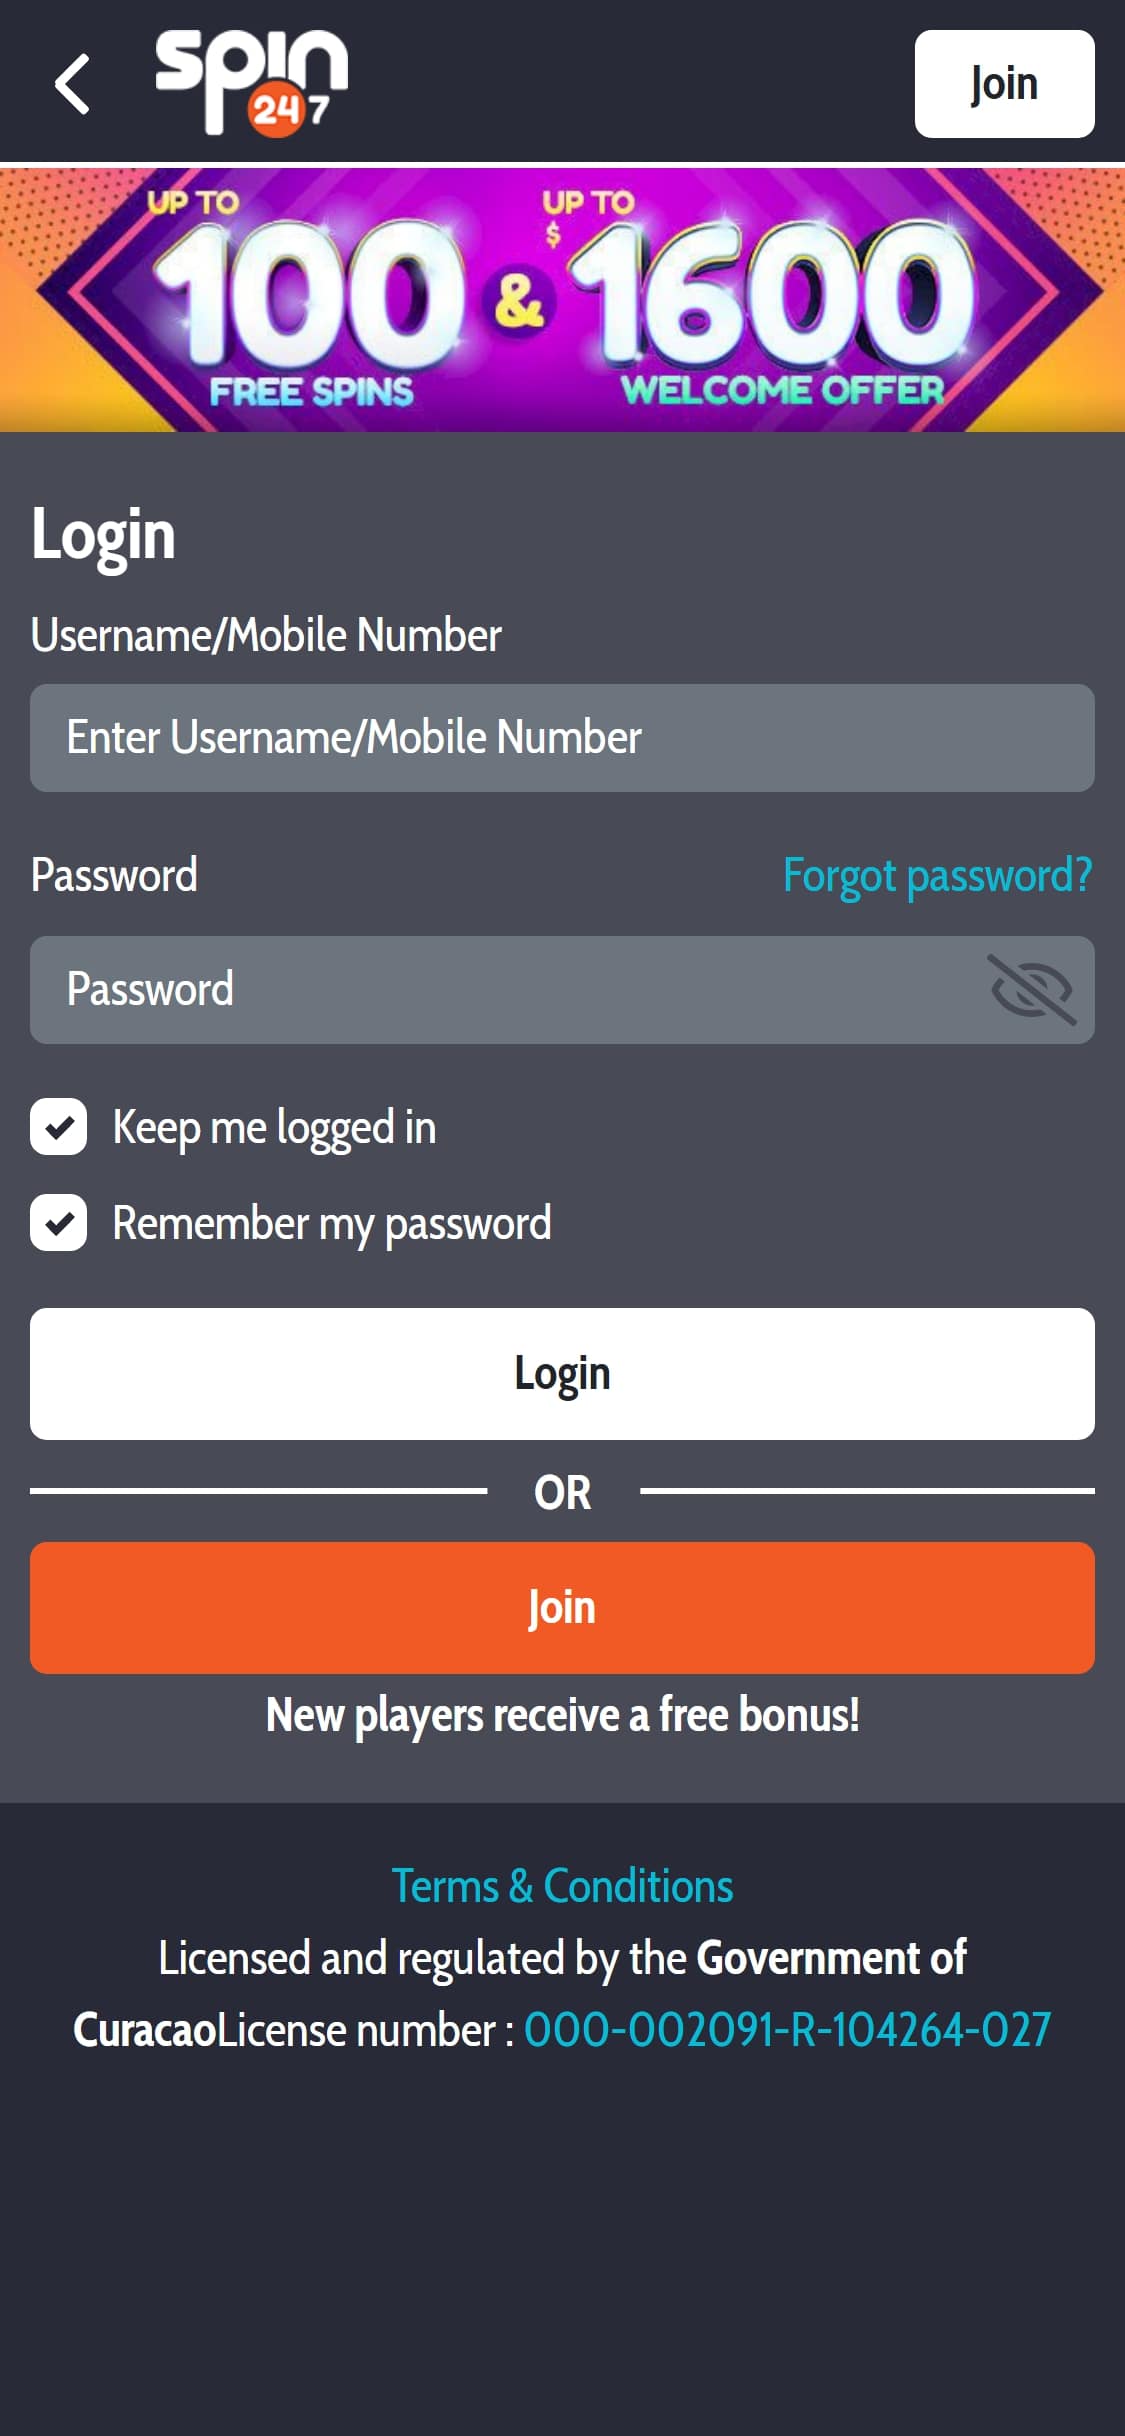 Spin247 Casino Mobile Login Review